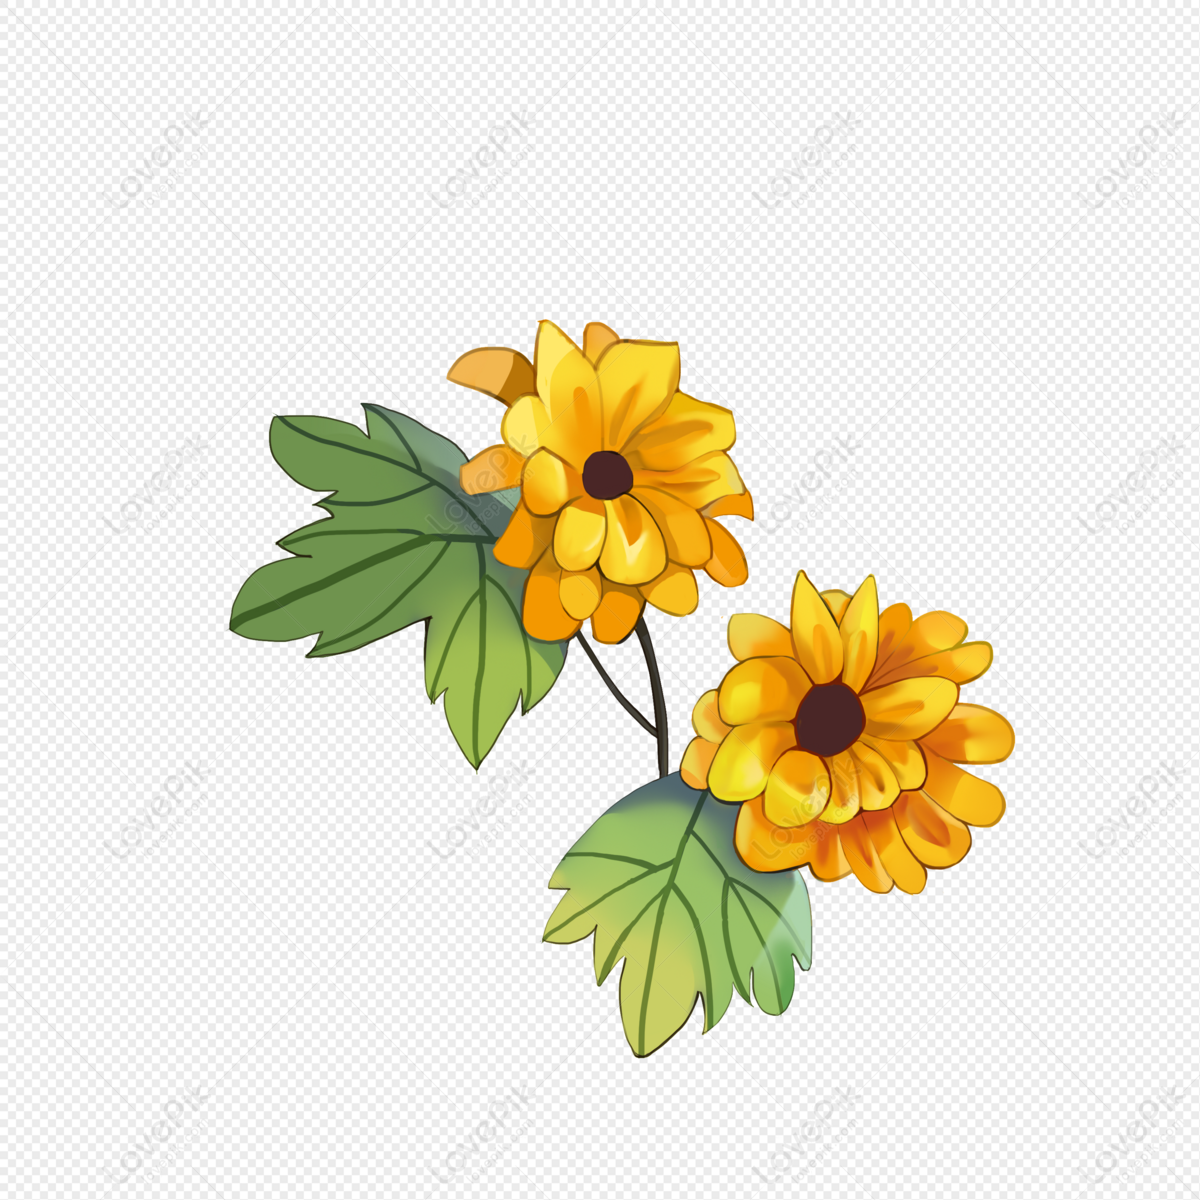 Small Daisy PNG Transparent Background And Clipart Image For Free Download  - Lovepik | 401632300